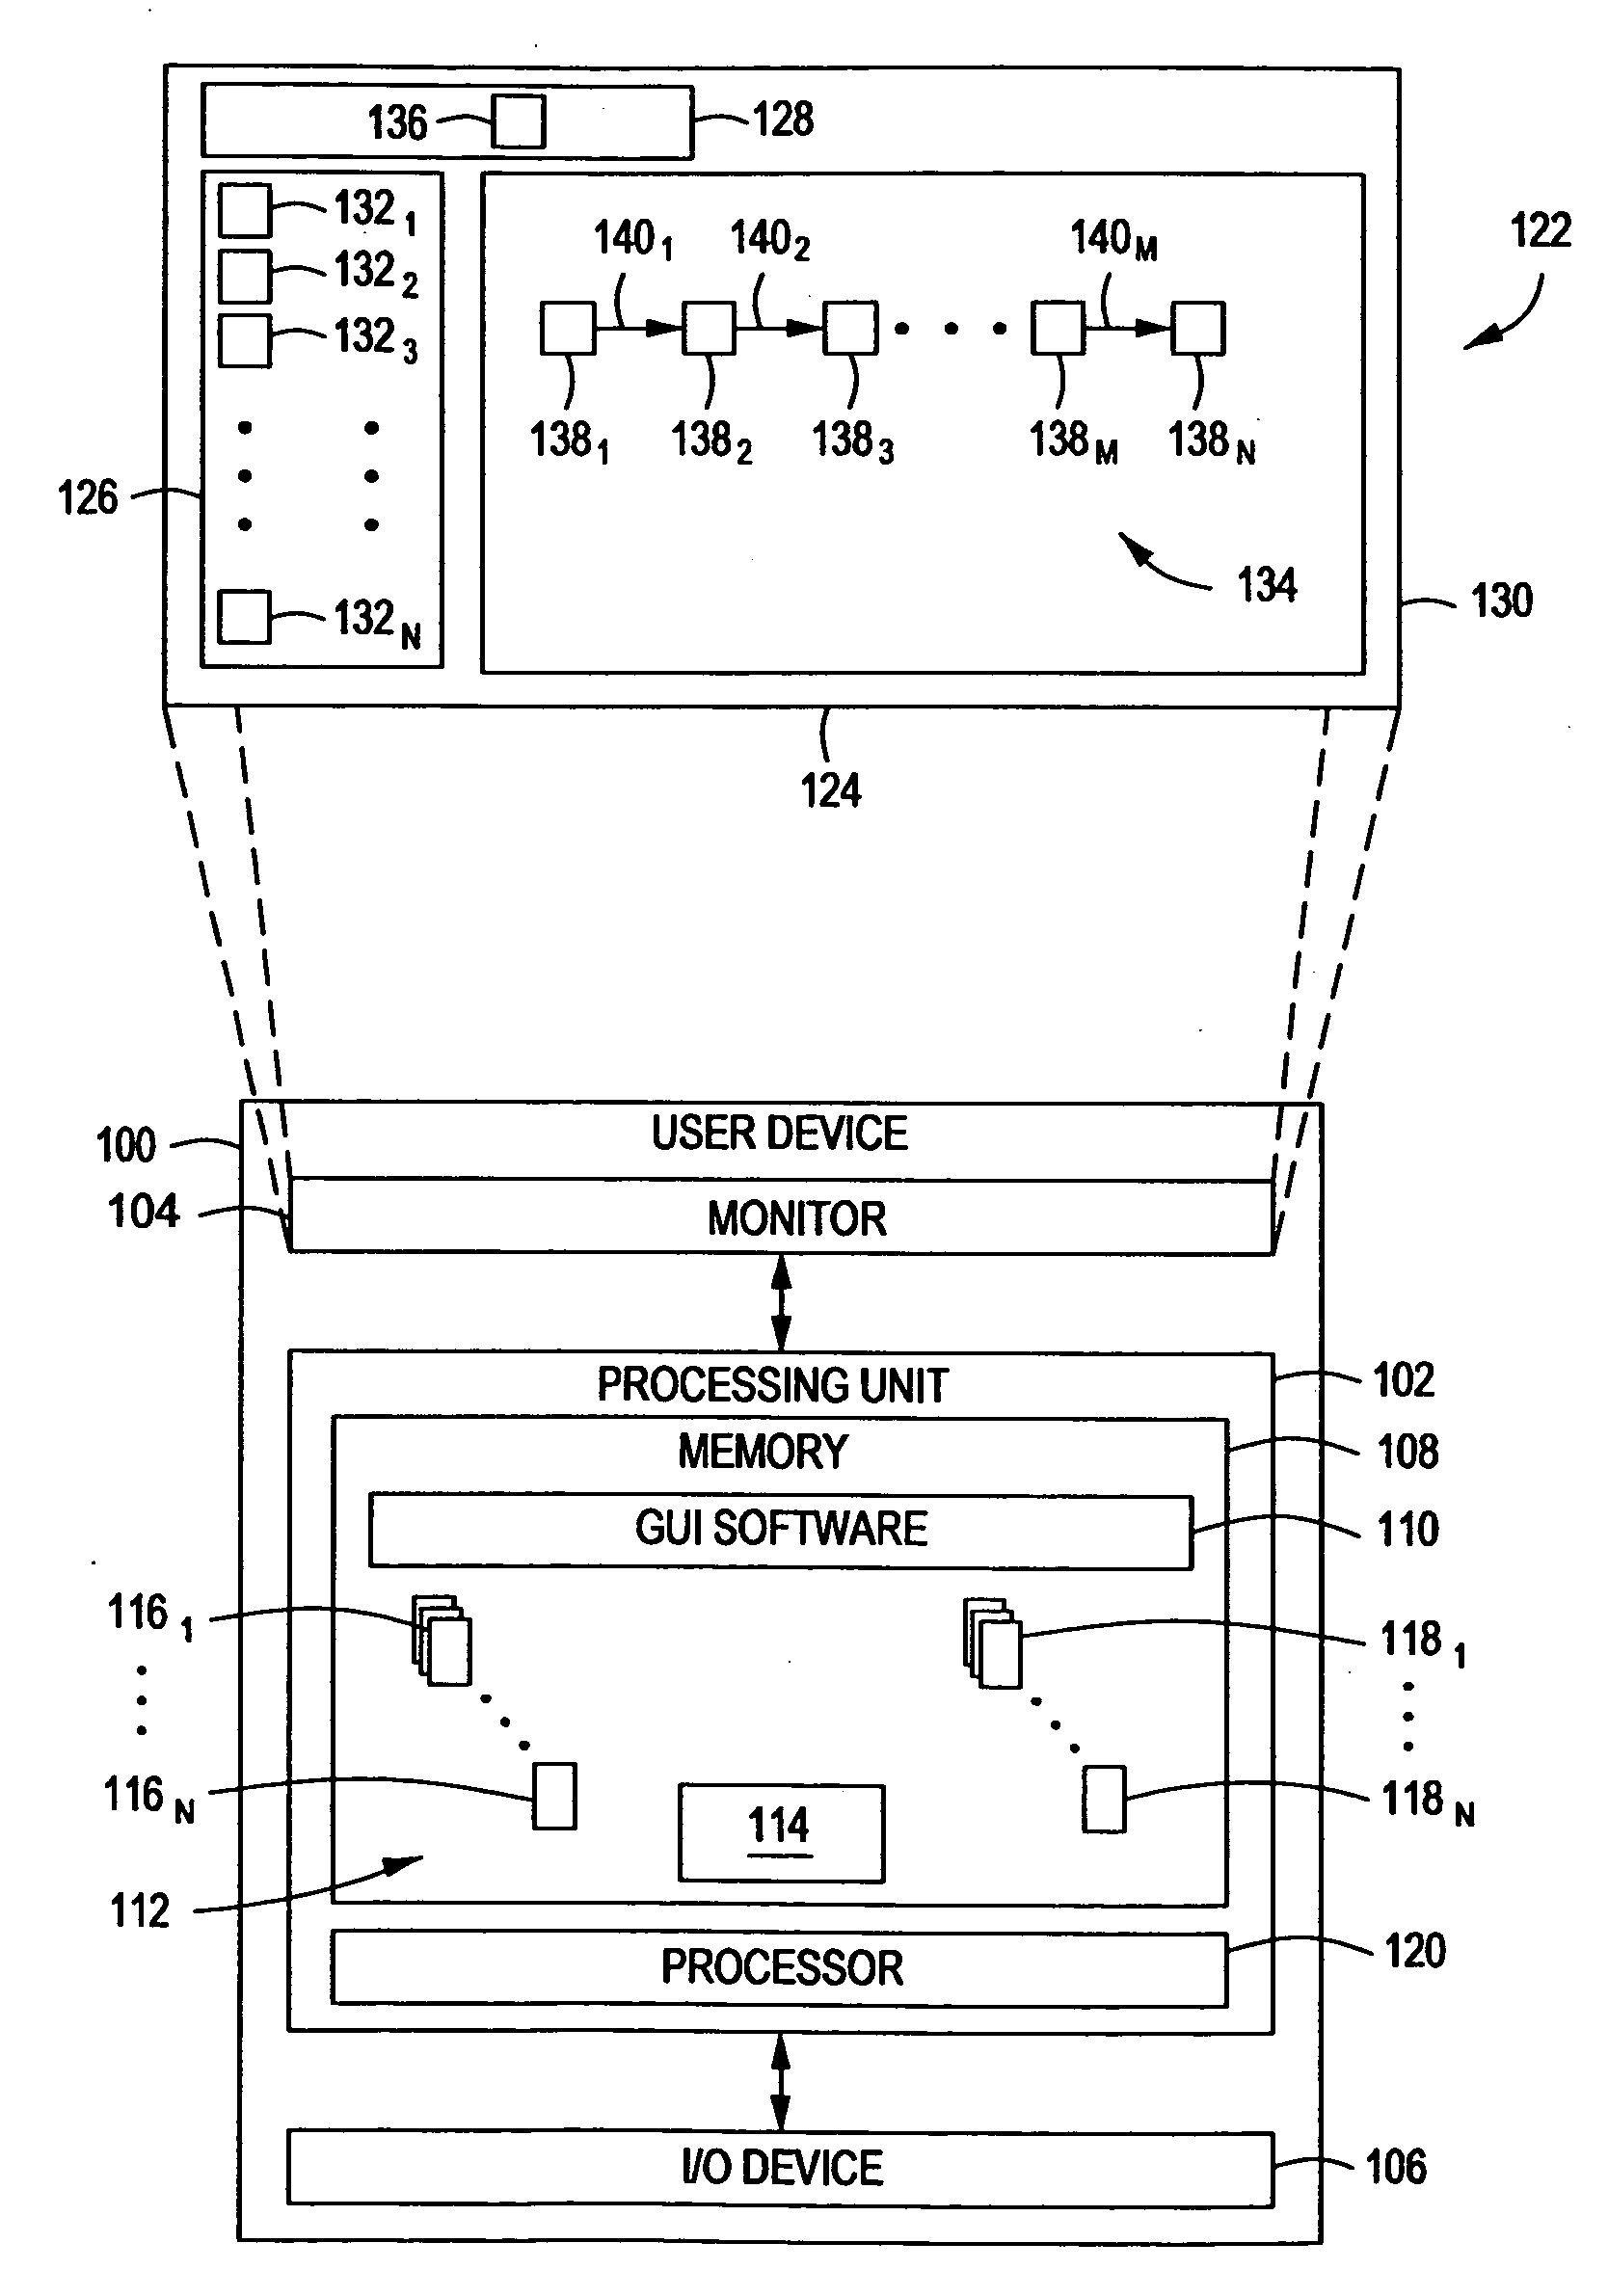 Method and apparatus for triggering workflow deployment and/or execution